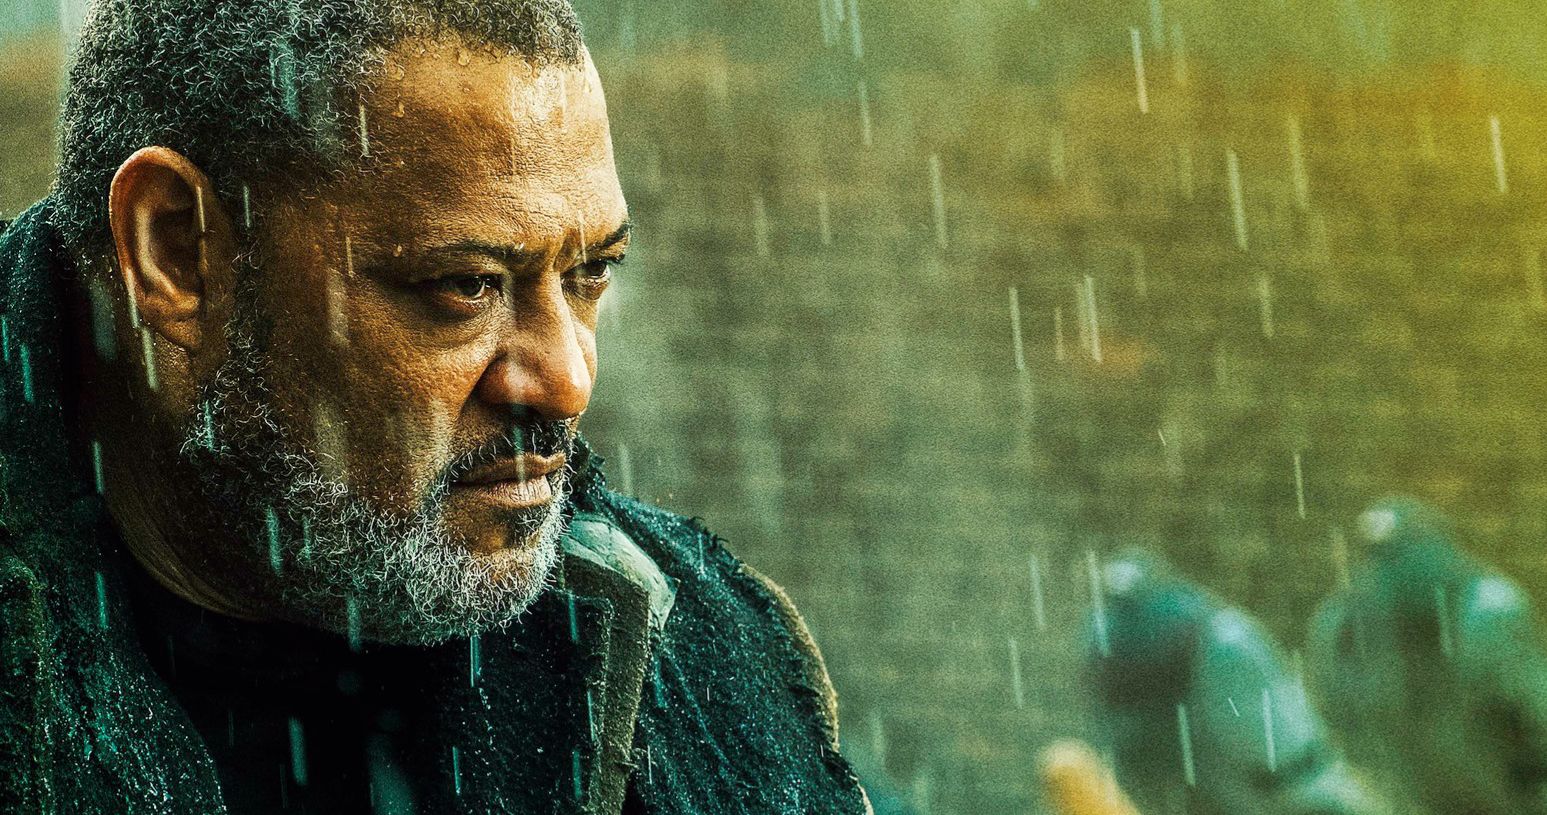 Laurence Fishburne Returns as the Bowery King in John Wick 4